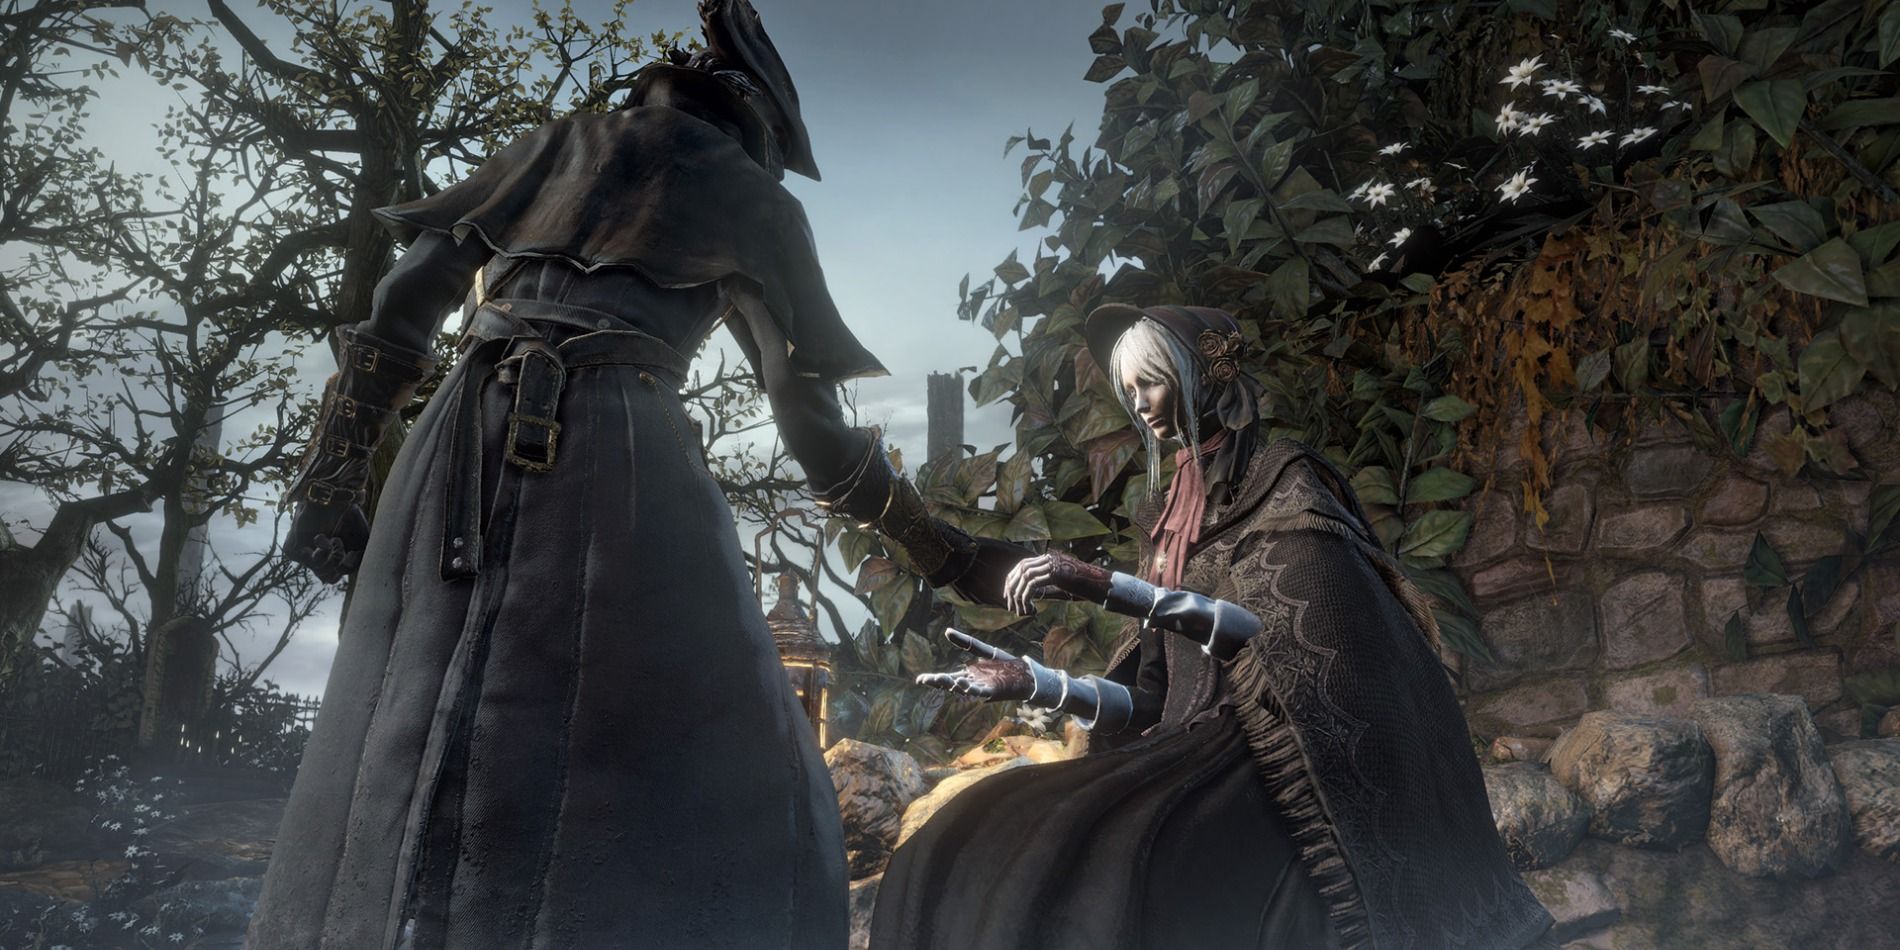 Player character interacting with the Doll in the Hunter's Dream in Bloodborne